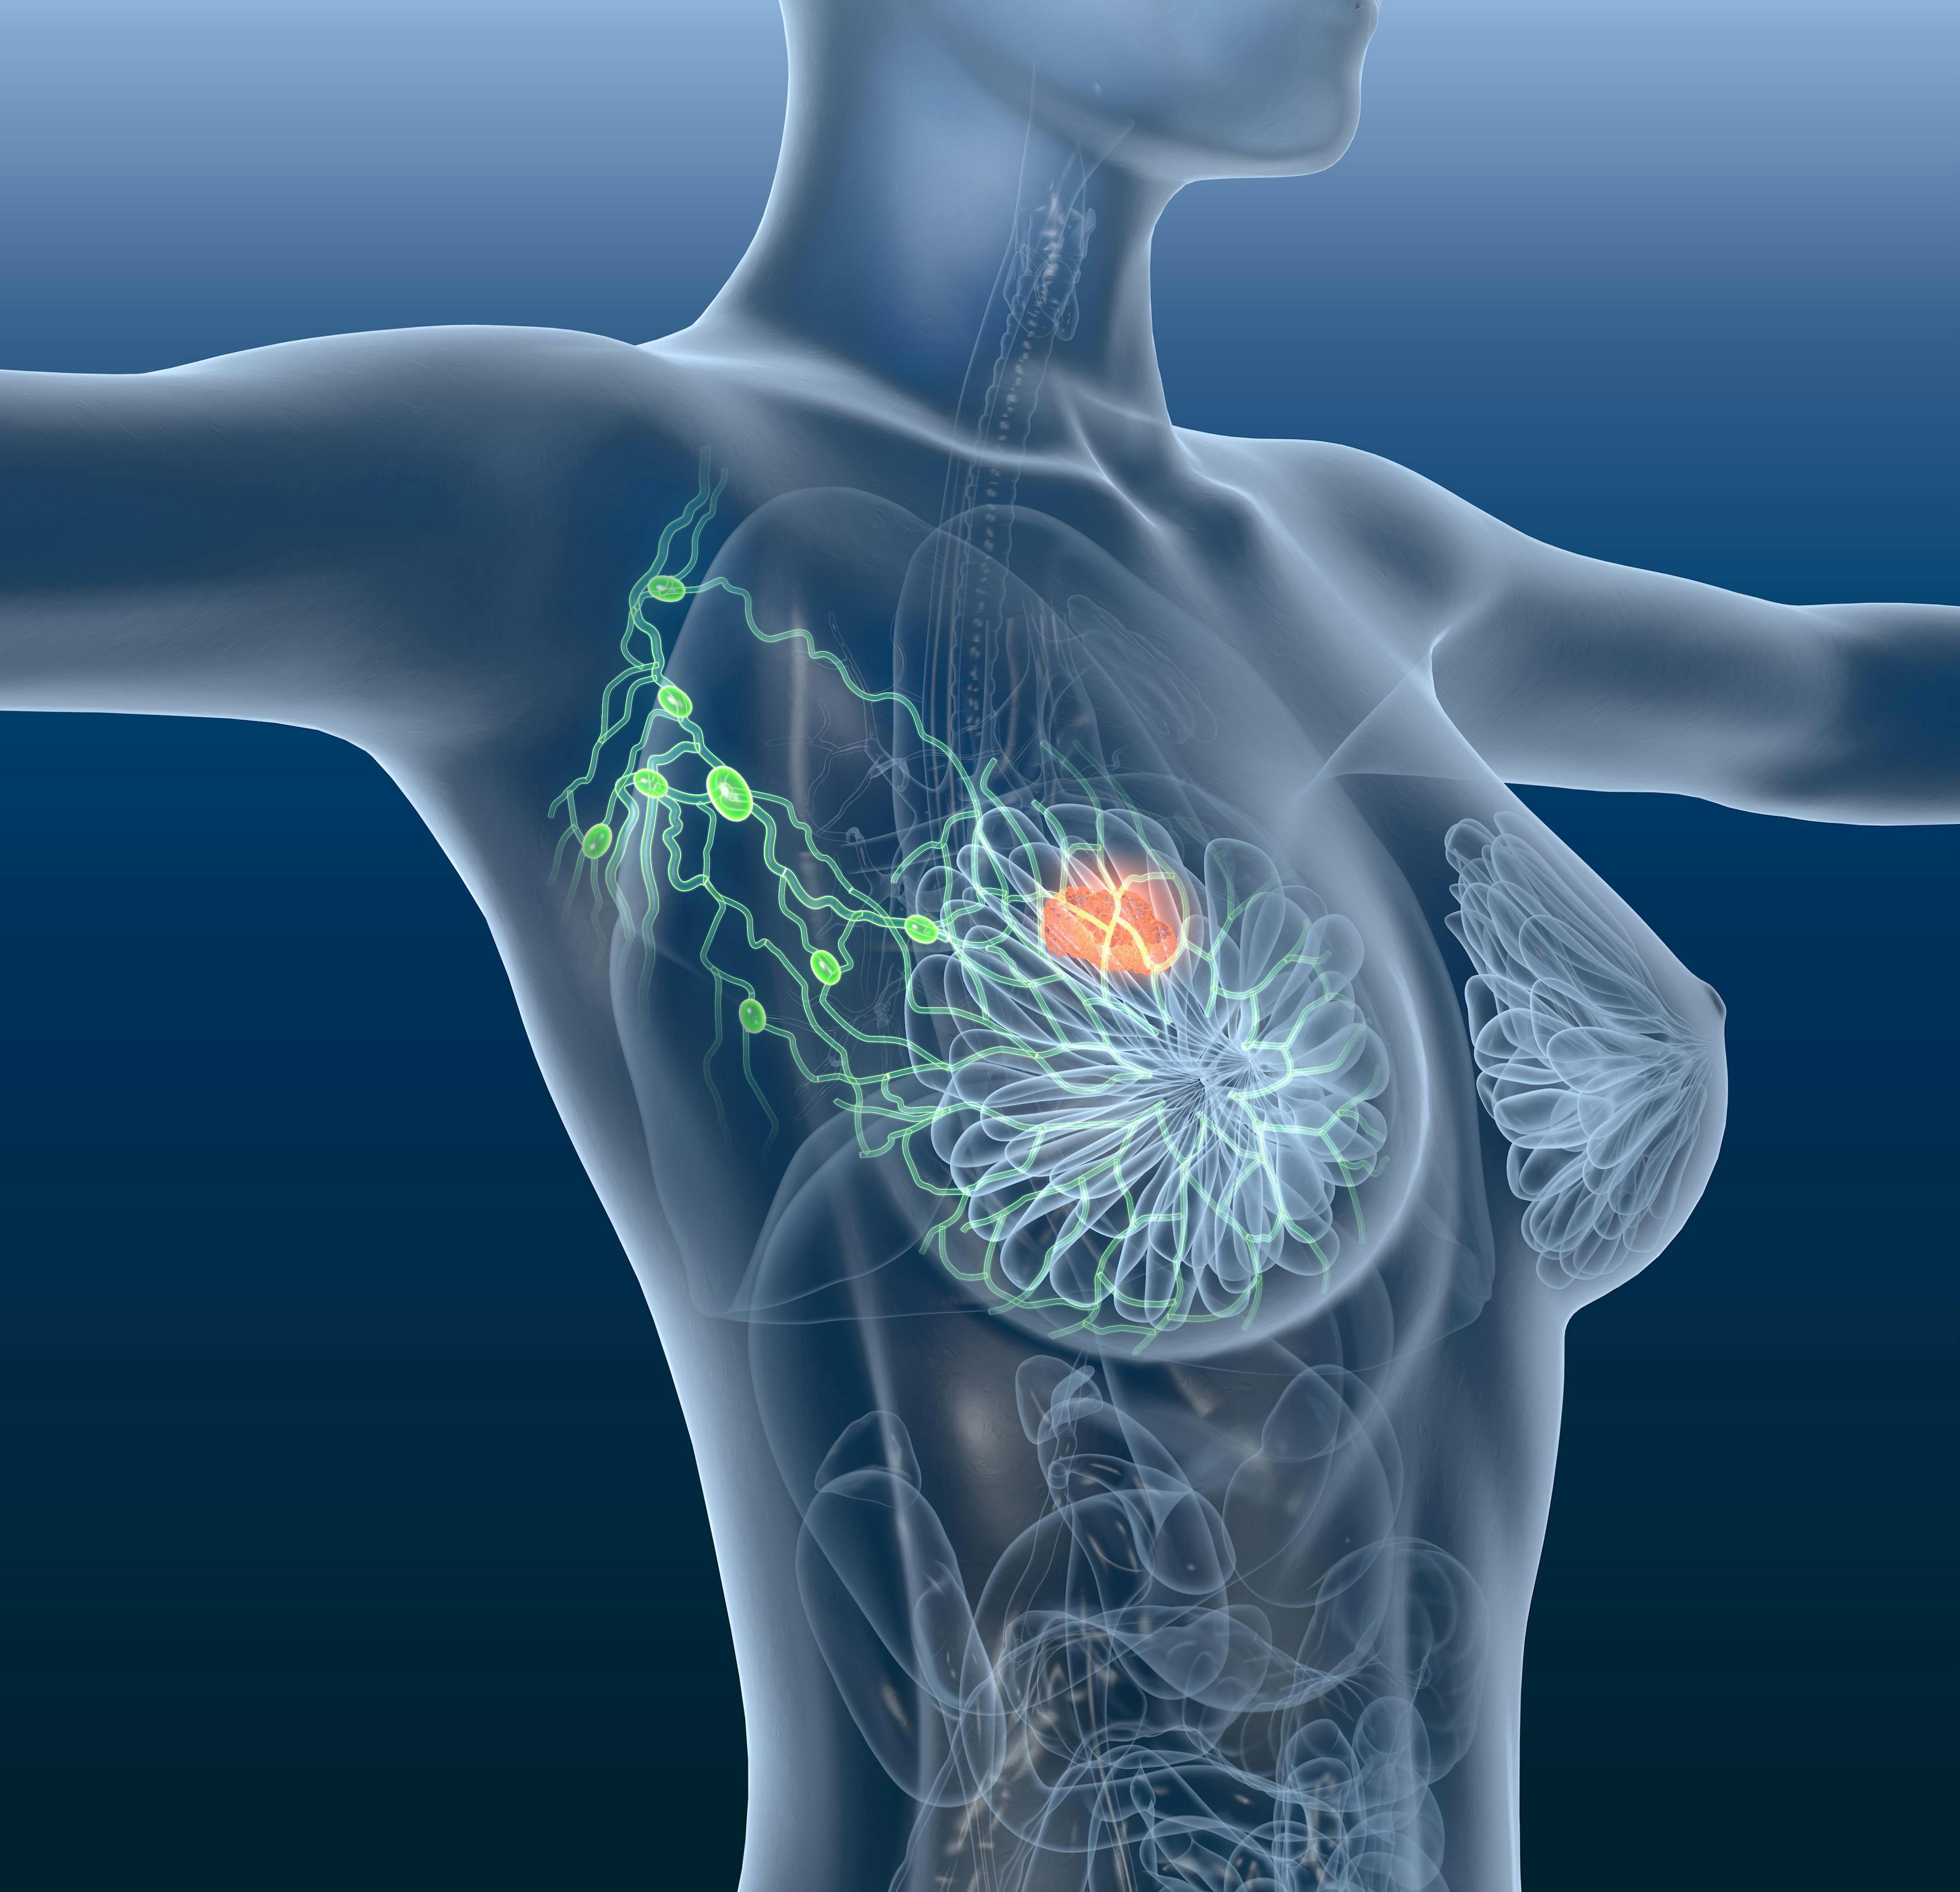 Certain RNA Expression Signatures Are Predictive of Outcomes for HER2+ Early Breast Cancer